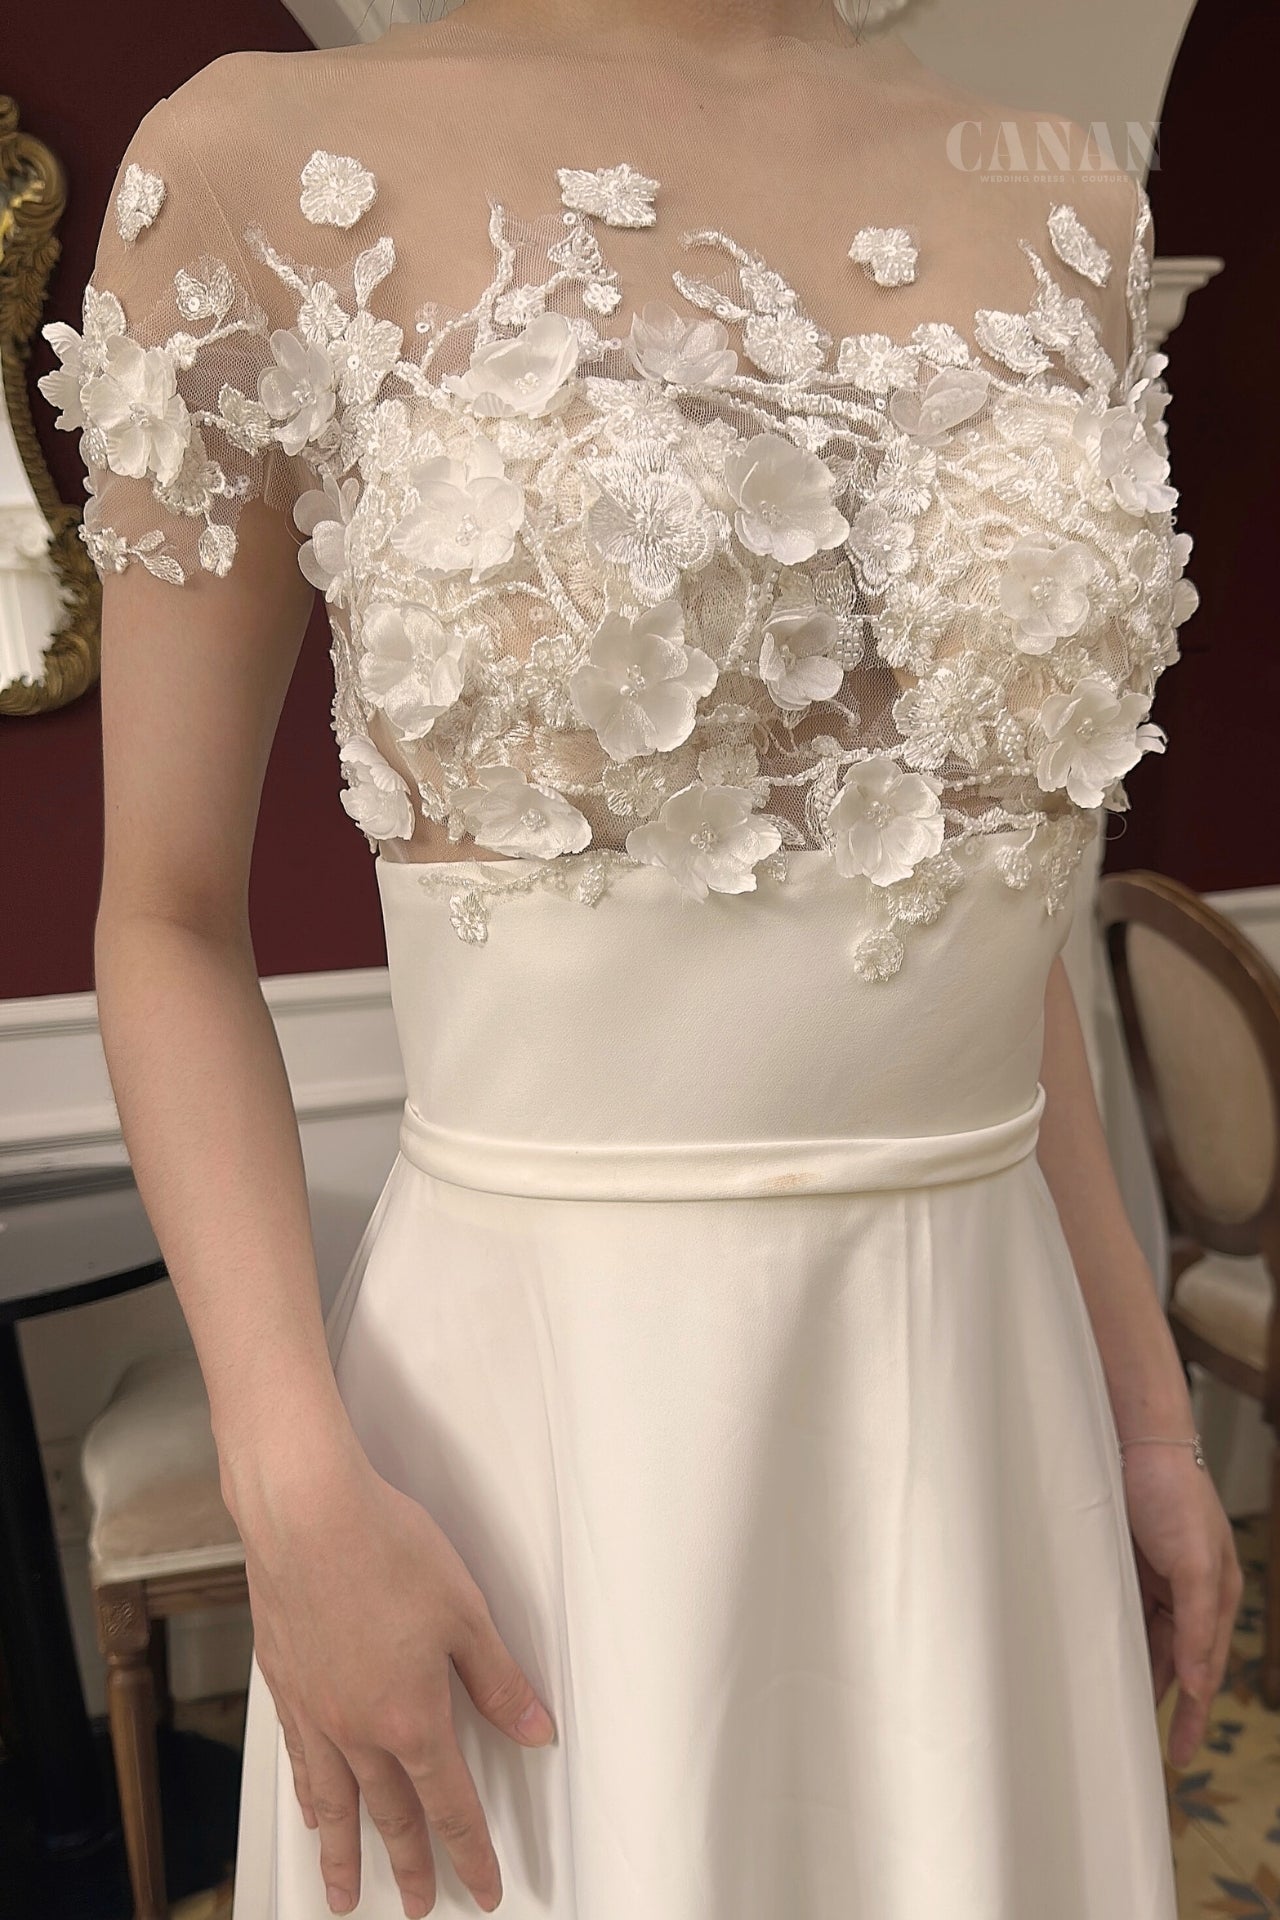 Sheath Wedding Dress Featuring Soft Satin and Stunning 3D Flower Lace Embellishments